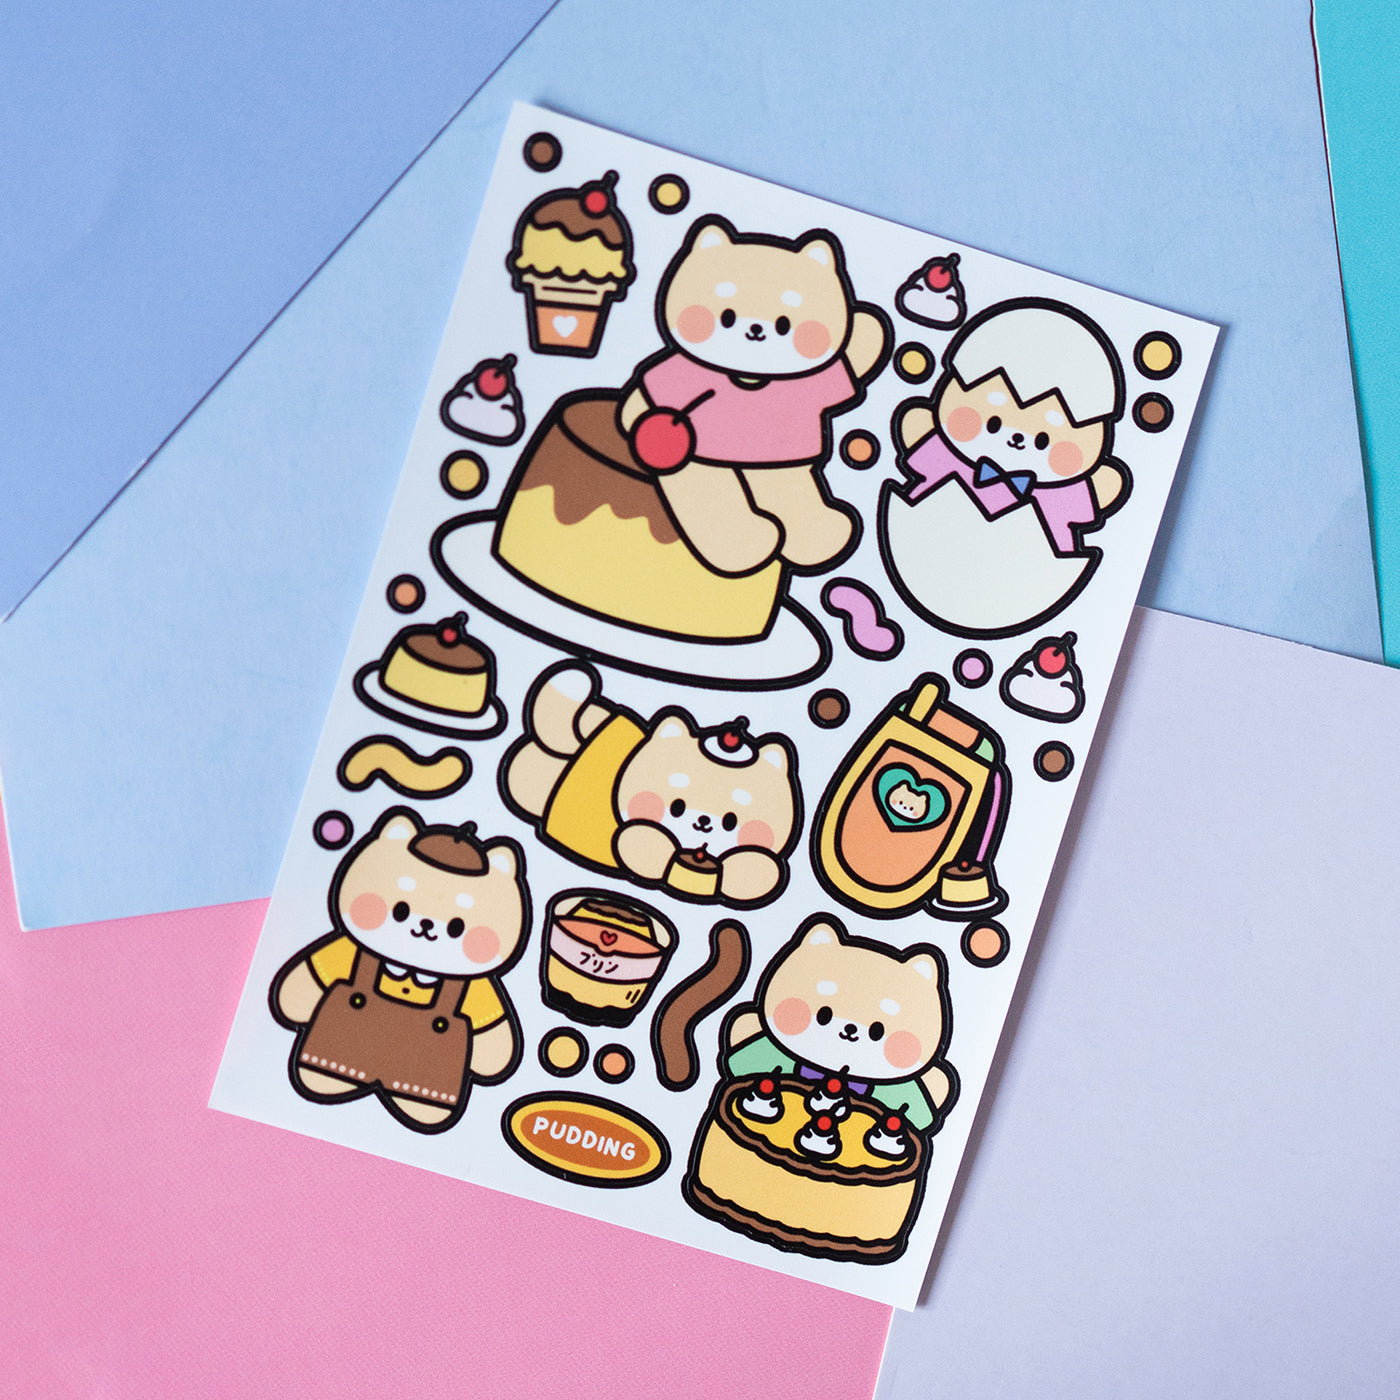 *new* Outlined Tadashiba and Pudding Matte Journal Sticker Sheet